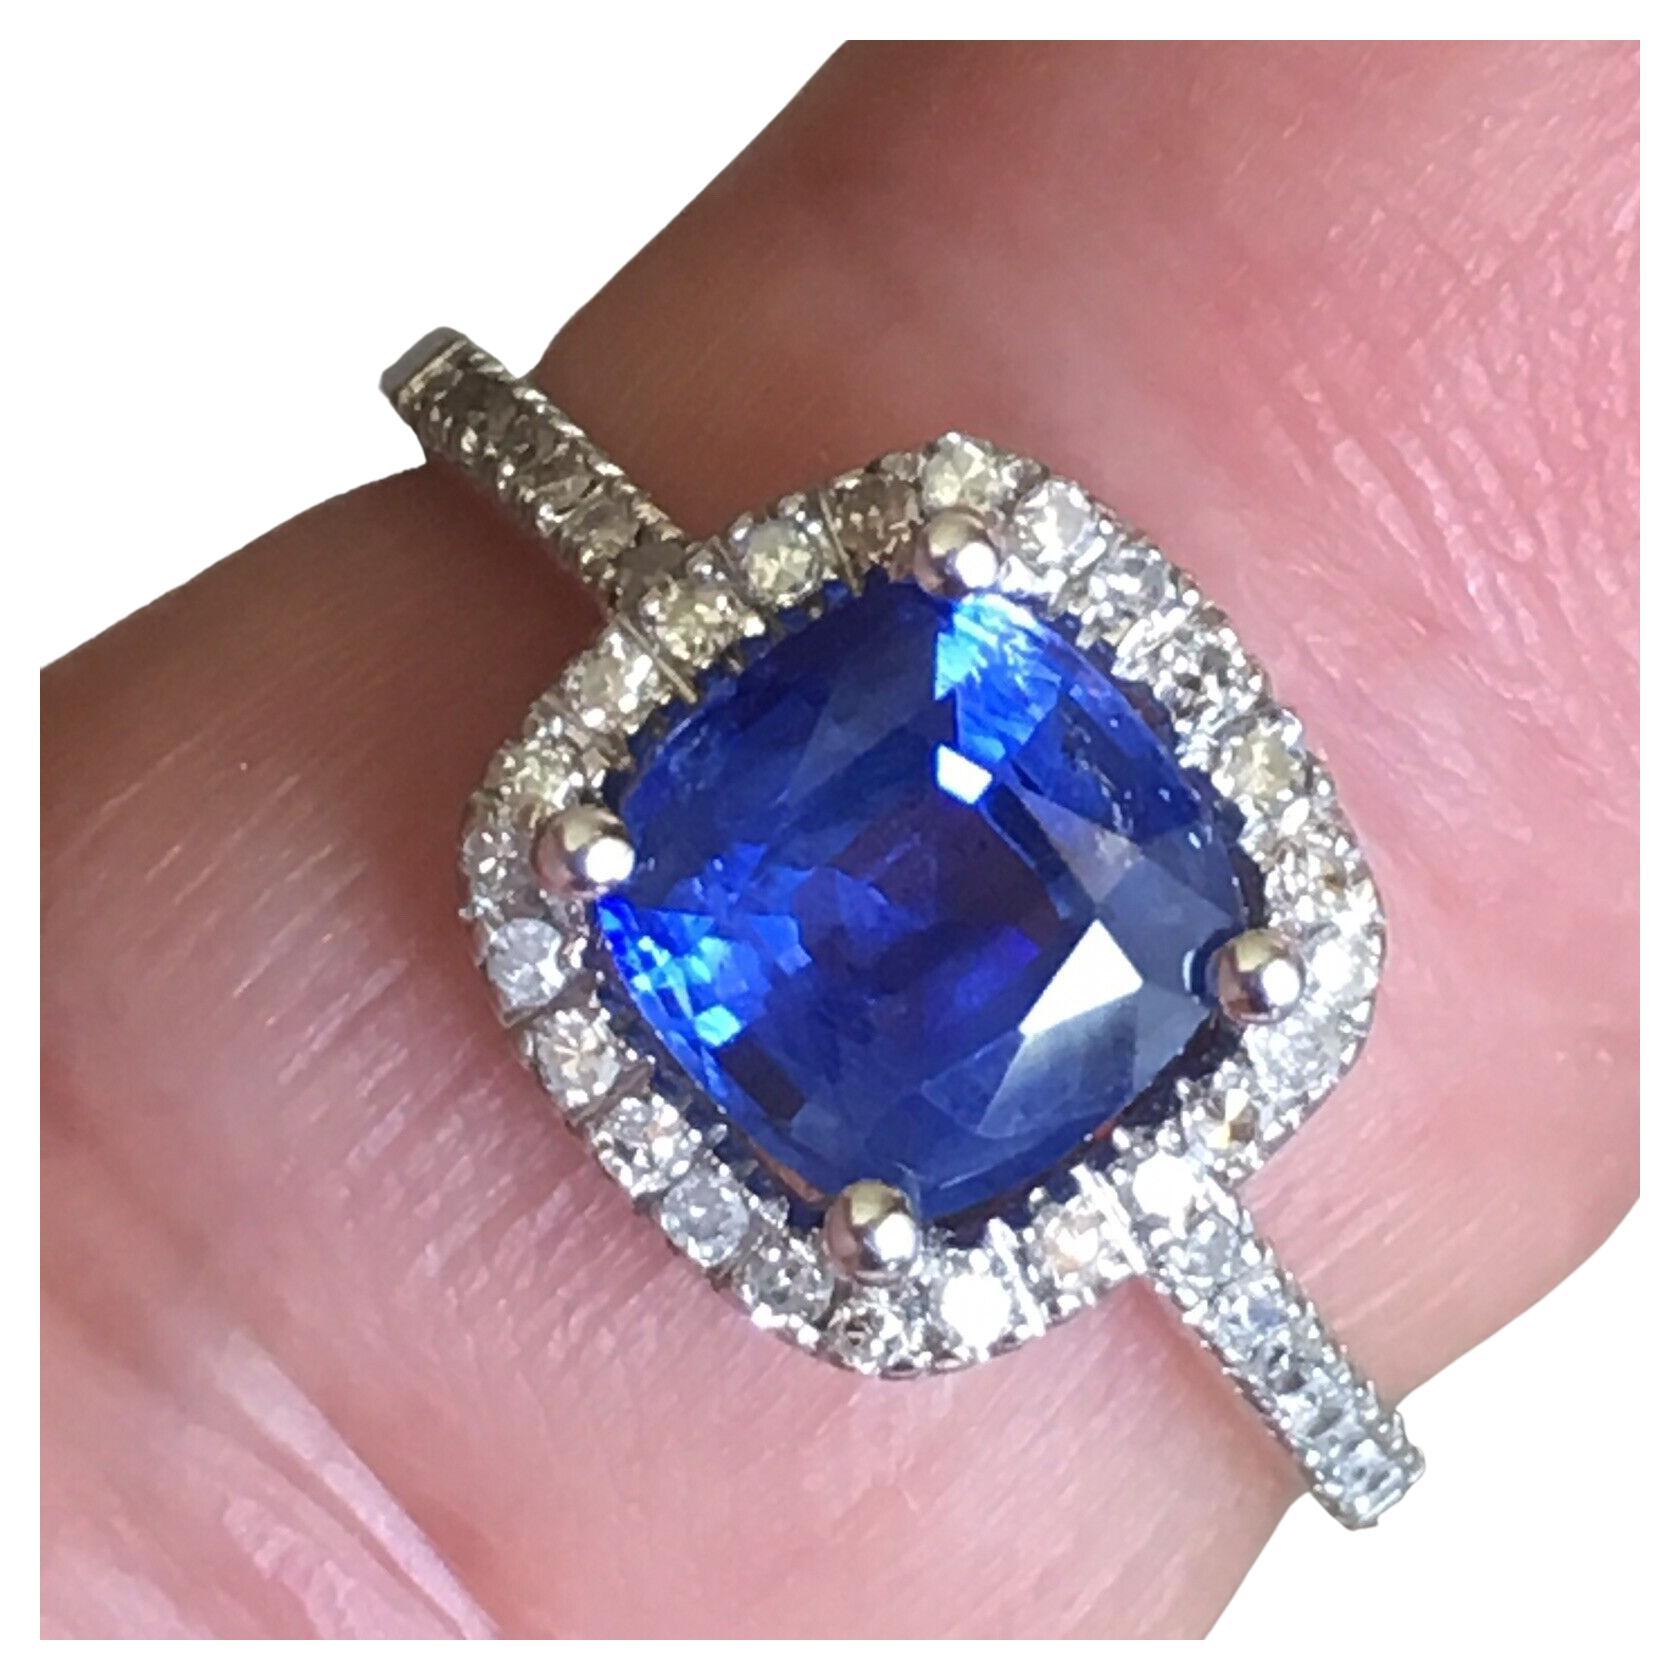 Diamond Cushion Cut Natural Sapphire 14kW Gold Engagement Ring New